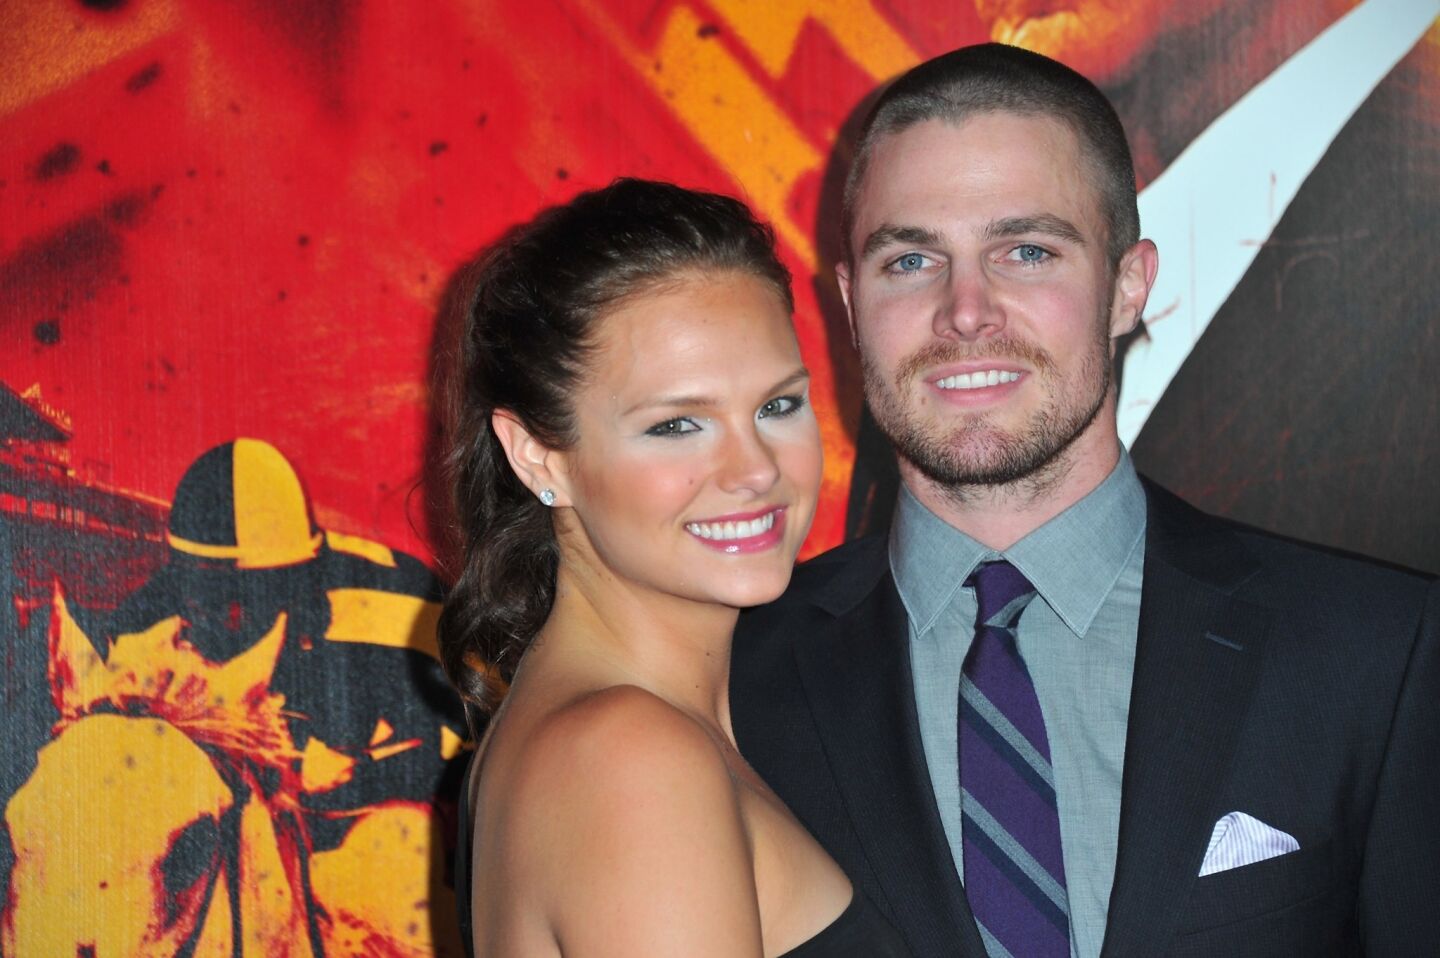 Stephen Amell and his wife Cassandra Jean welcomed a baby girl named Mavi Alexandra Jean Amell in October 2013. The "Arrow" actor announced the good news via Facebook, simultaneously promoting his brother's new TV series. "She came just in time for Amell Wednesdays," Amell wrote, sharing a photo of himself carrying his daughter and pointing at his brother Robbie Amell, who stars in the CW series "The Tomorrow People." The pair got hitched on Christmas Day 2012 in a Caribbean destination wedding. They later celebrated once more in May 2013 with a New Orleans-themed bash.